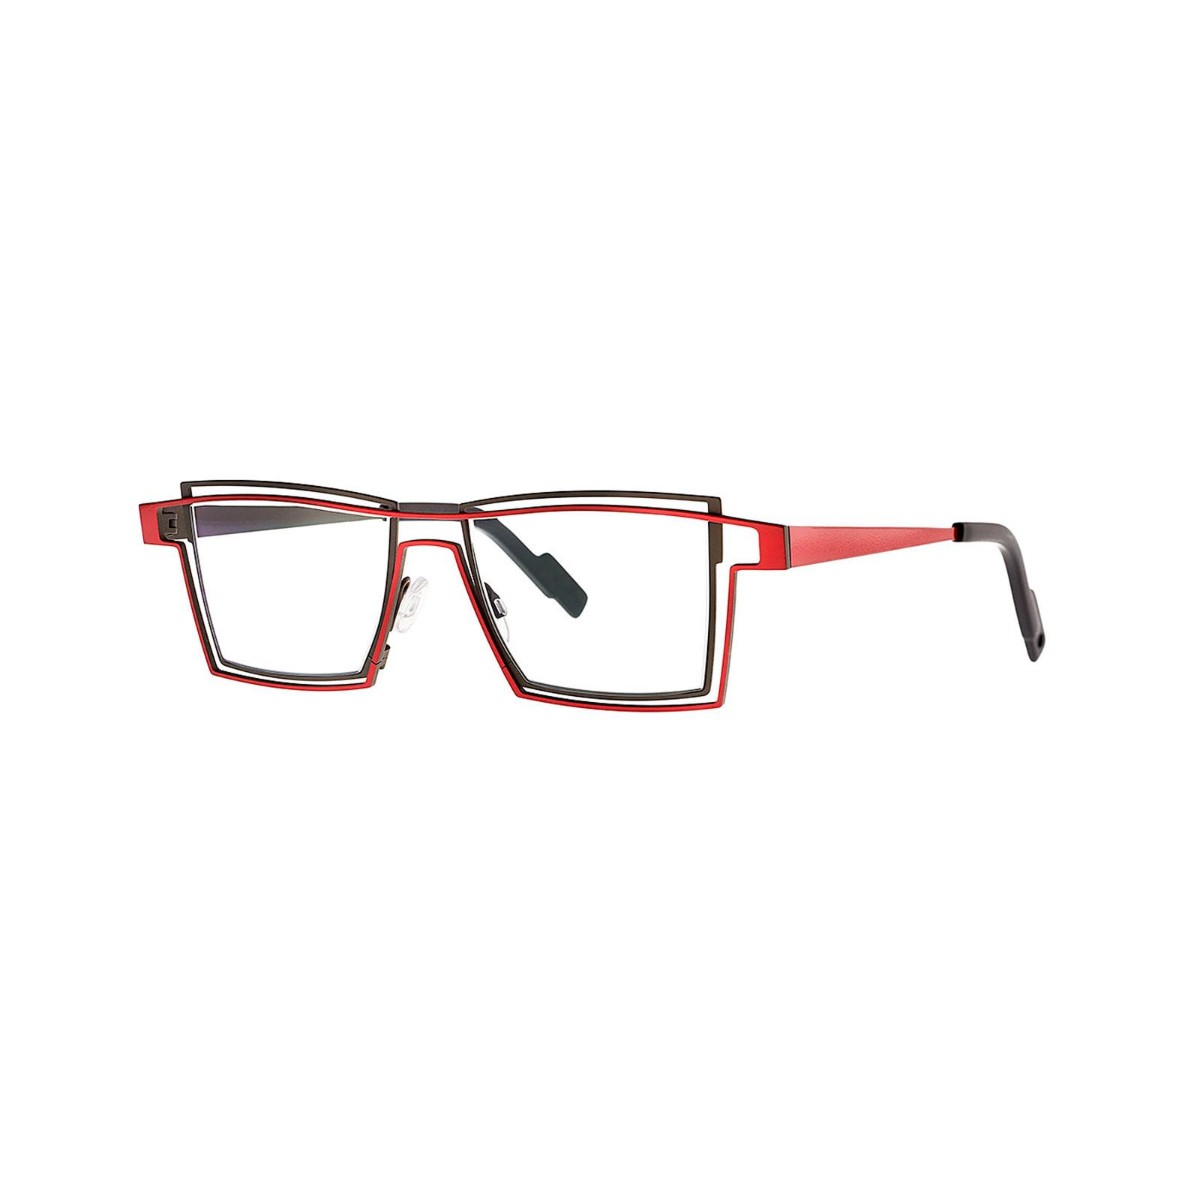 Theo - Outline 388 Red/Gray